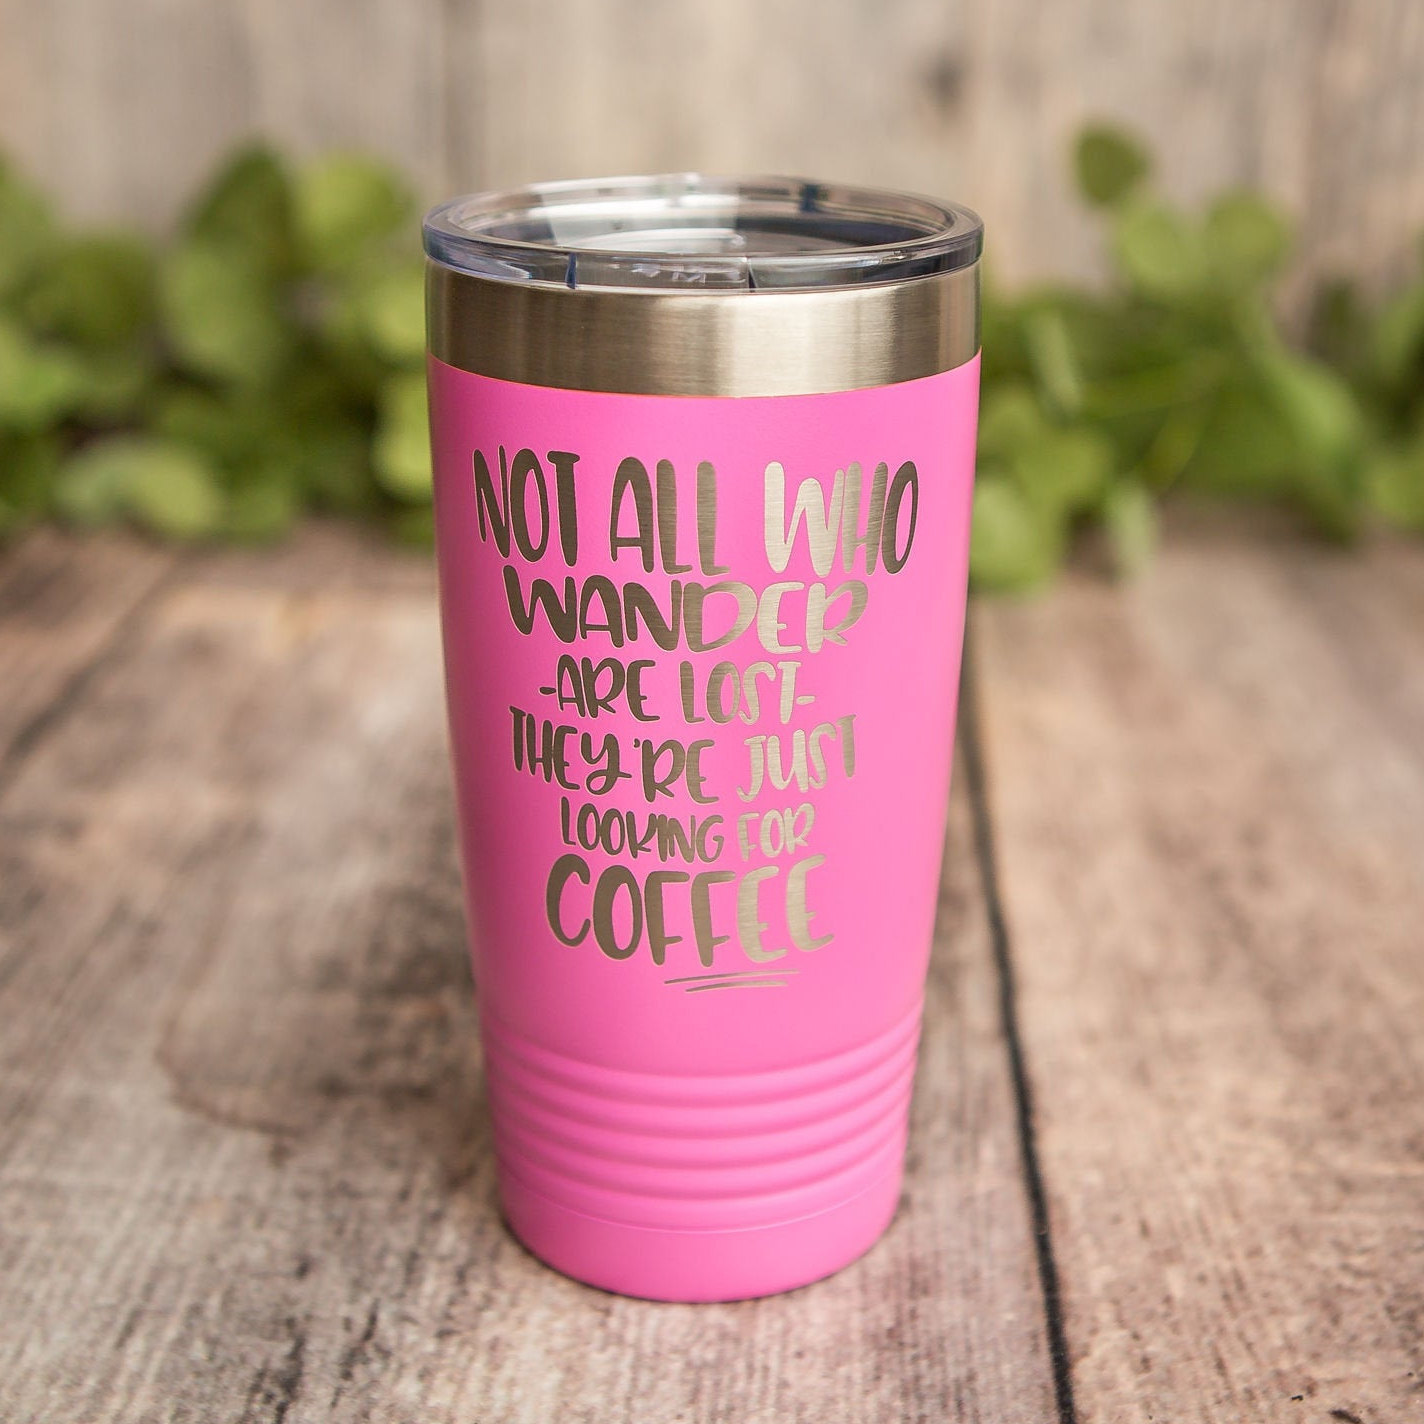 https://3cetching.com/wp-content/uploads/2020/09/looking-for-coffee-engraved-stainless-steel-coffee-tumbler-insulated-travel-mug-coffee-cup-gift-for-her-5f5fc6d2.jpg